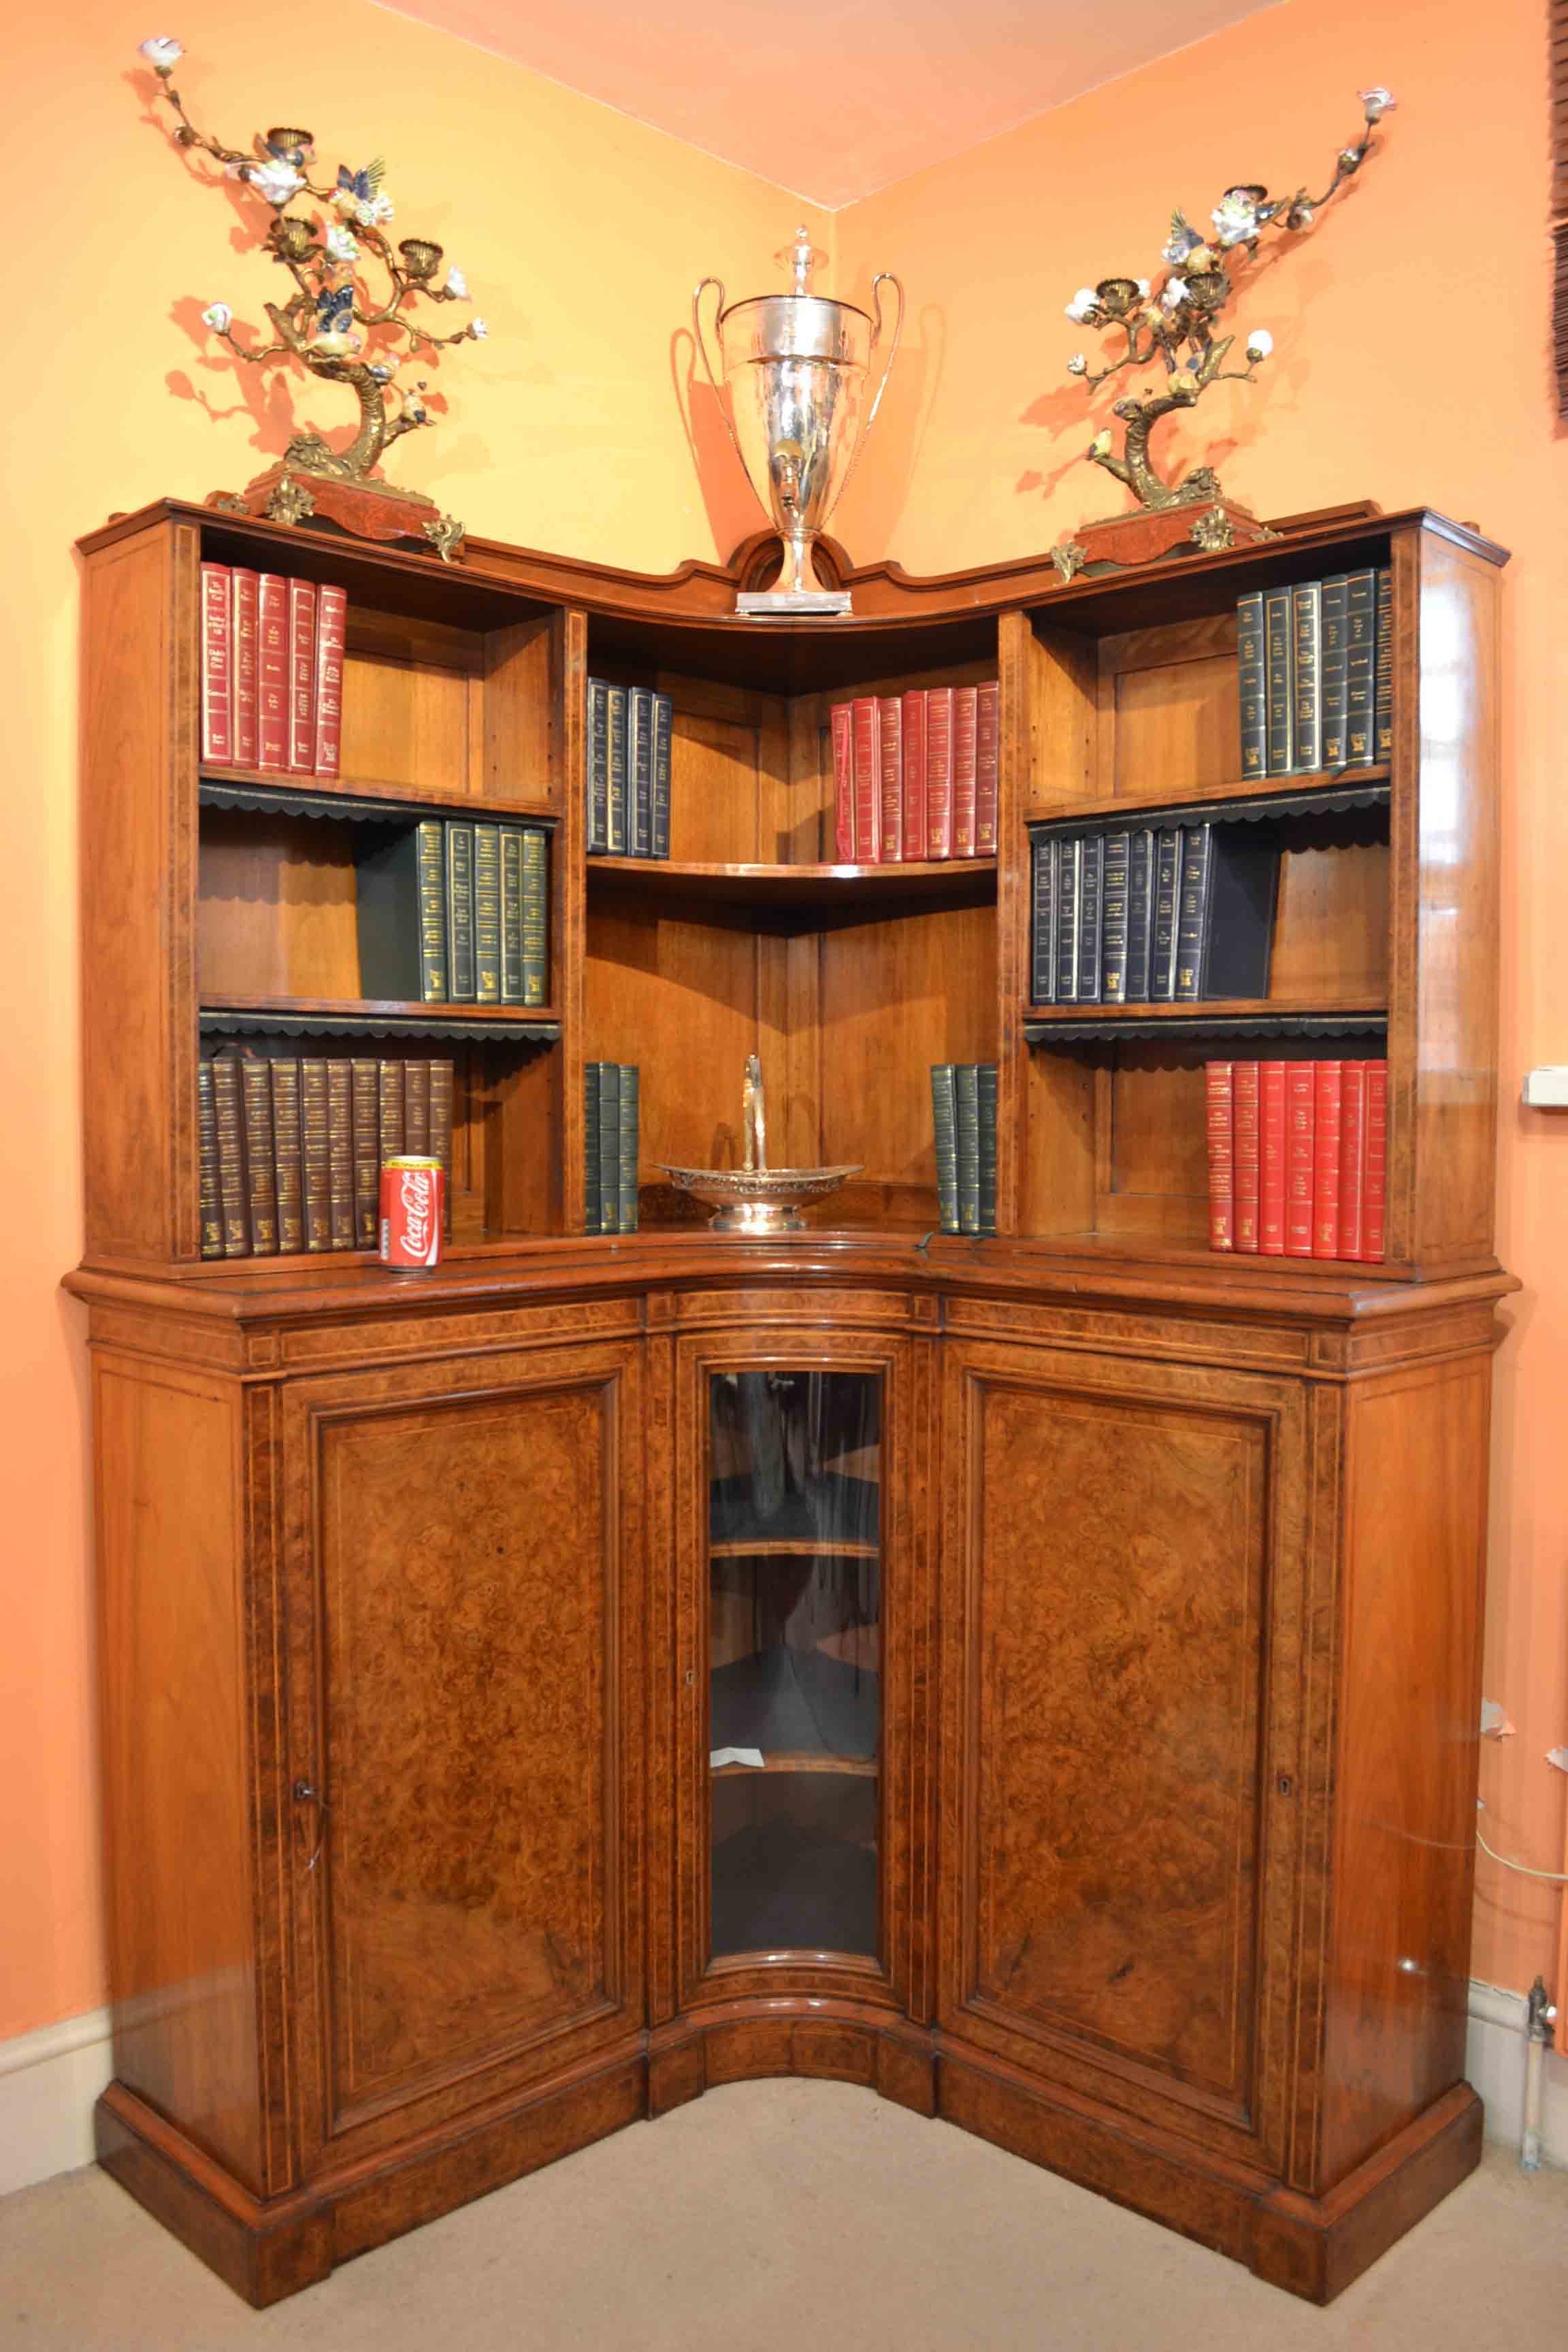 Regent Antiques - Bookcases and display cabinets - Antique Victorian